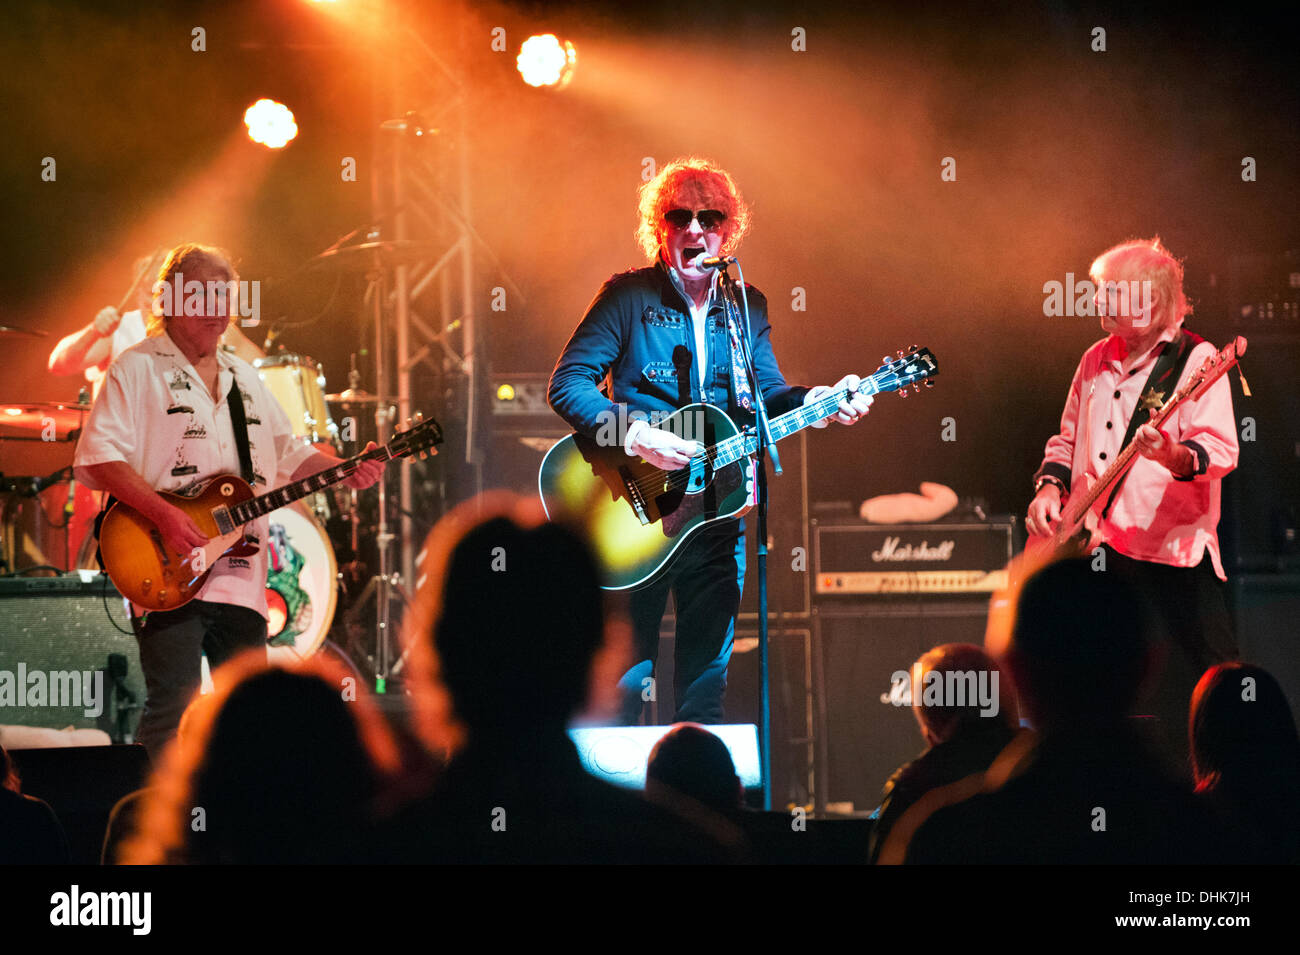 Birmingham, UK . 11th Nov, 2013. Reformed 1970s rock band Mott the Hoople play the first concert of their UK tour at Birmingham Symphony Hall, 11 October 2013. Lead singer Ian Hunter with dark glasses. Mick Ralphs on guitar and Overend Watts on bass. © John Bentley/Alamy Live News Stock Photo